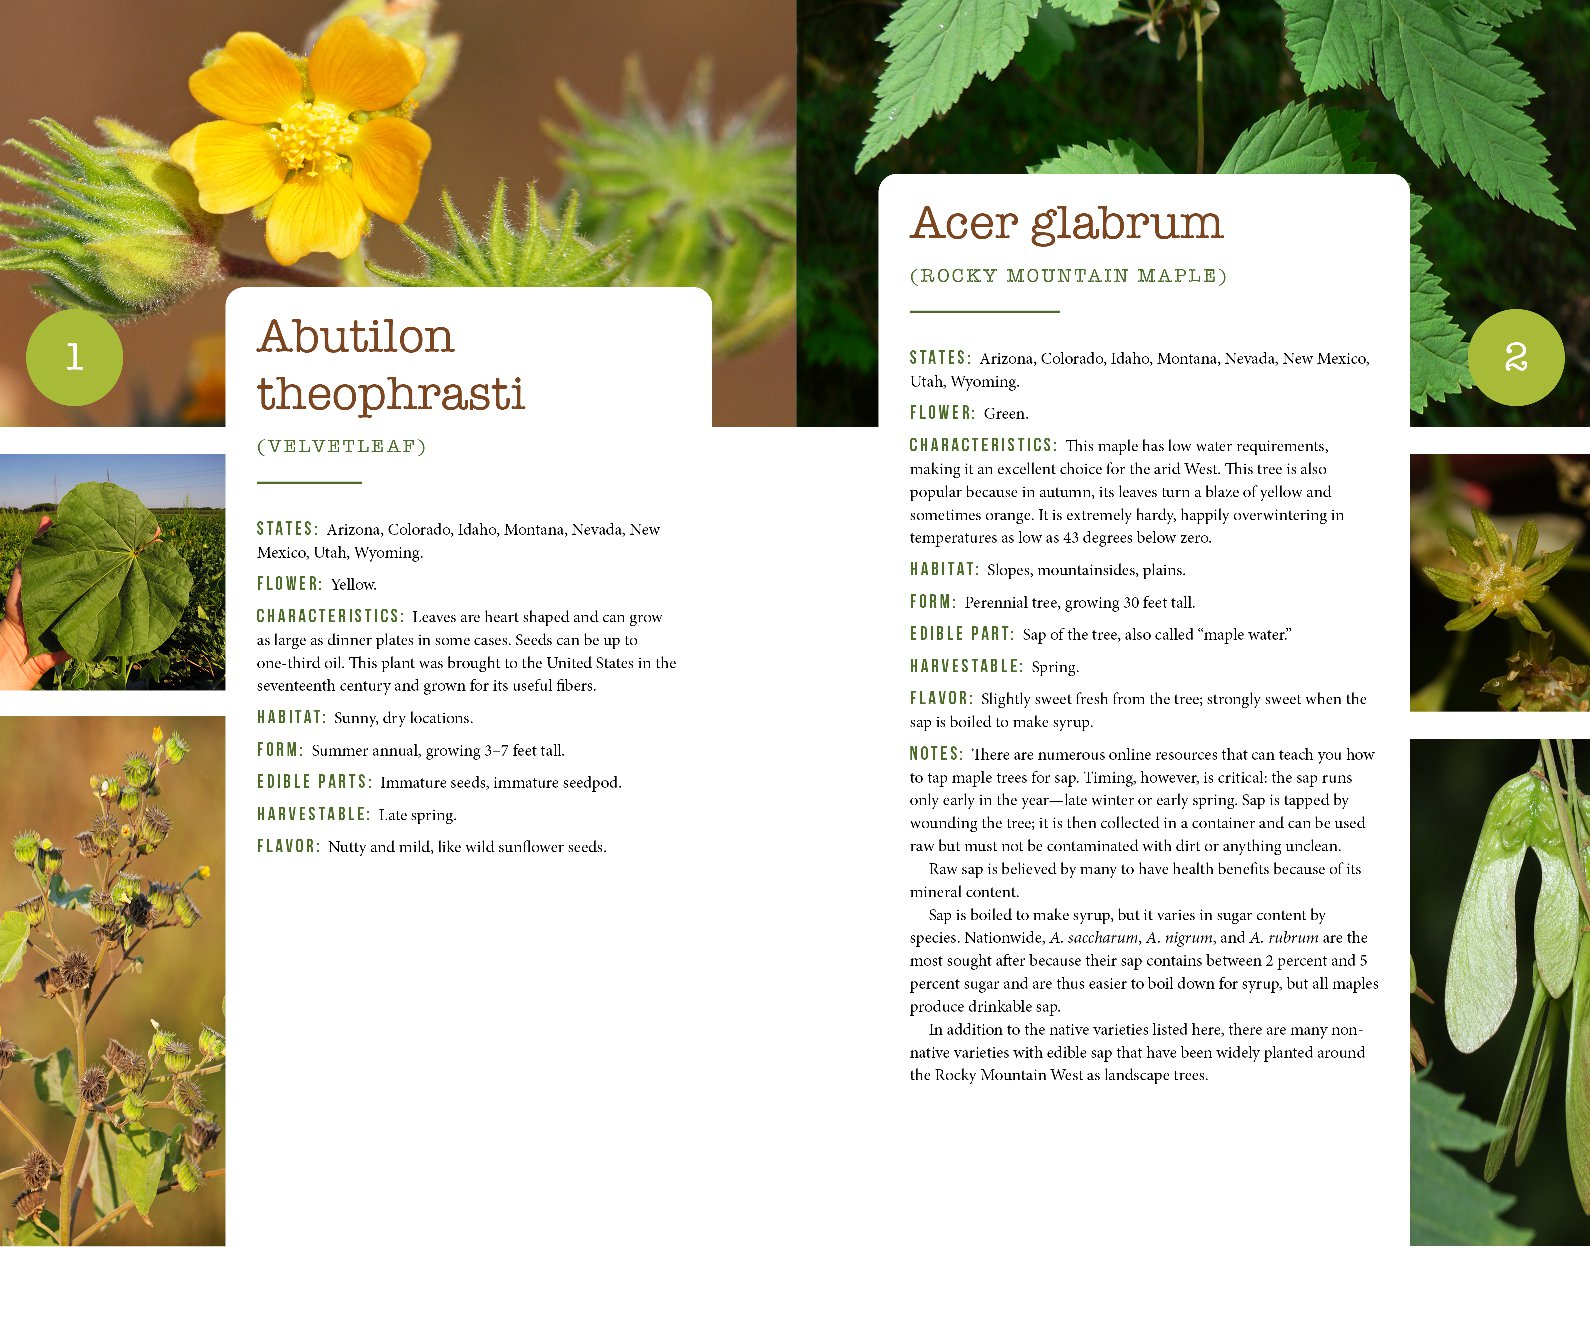 437 Edible Wild Plants of the Rocky Mountain West